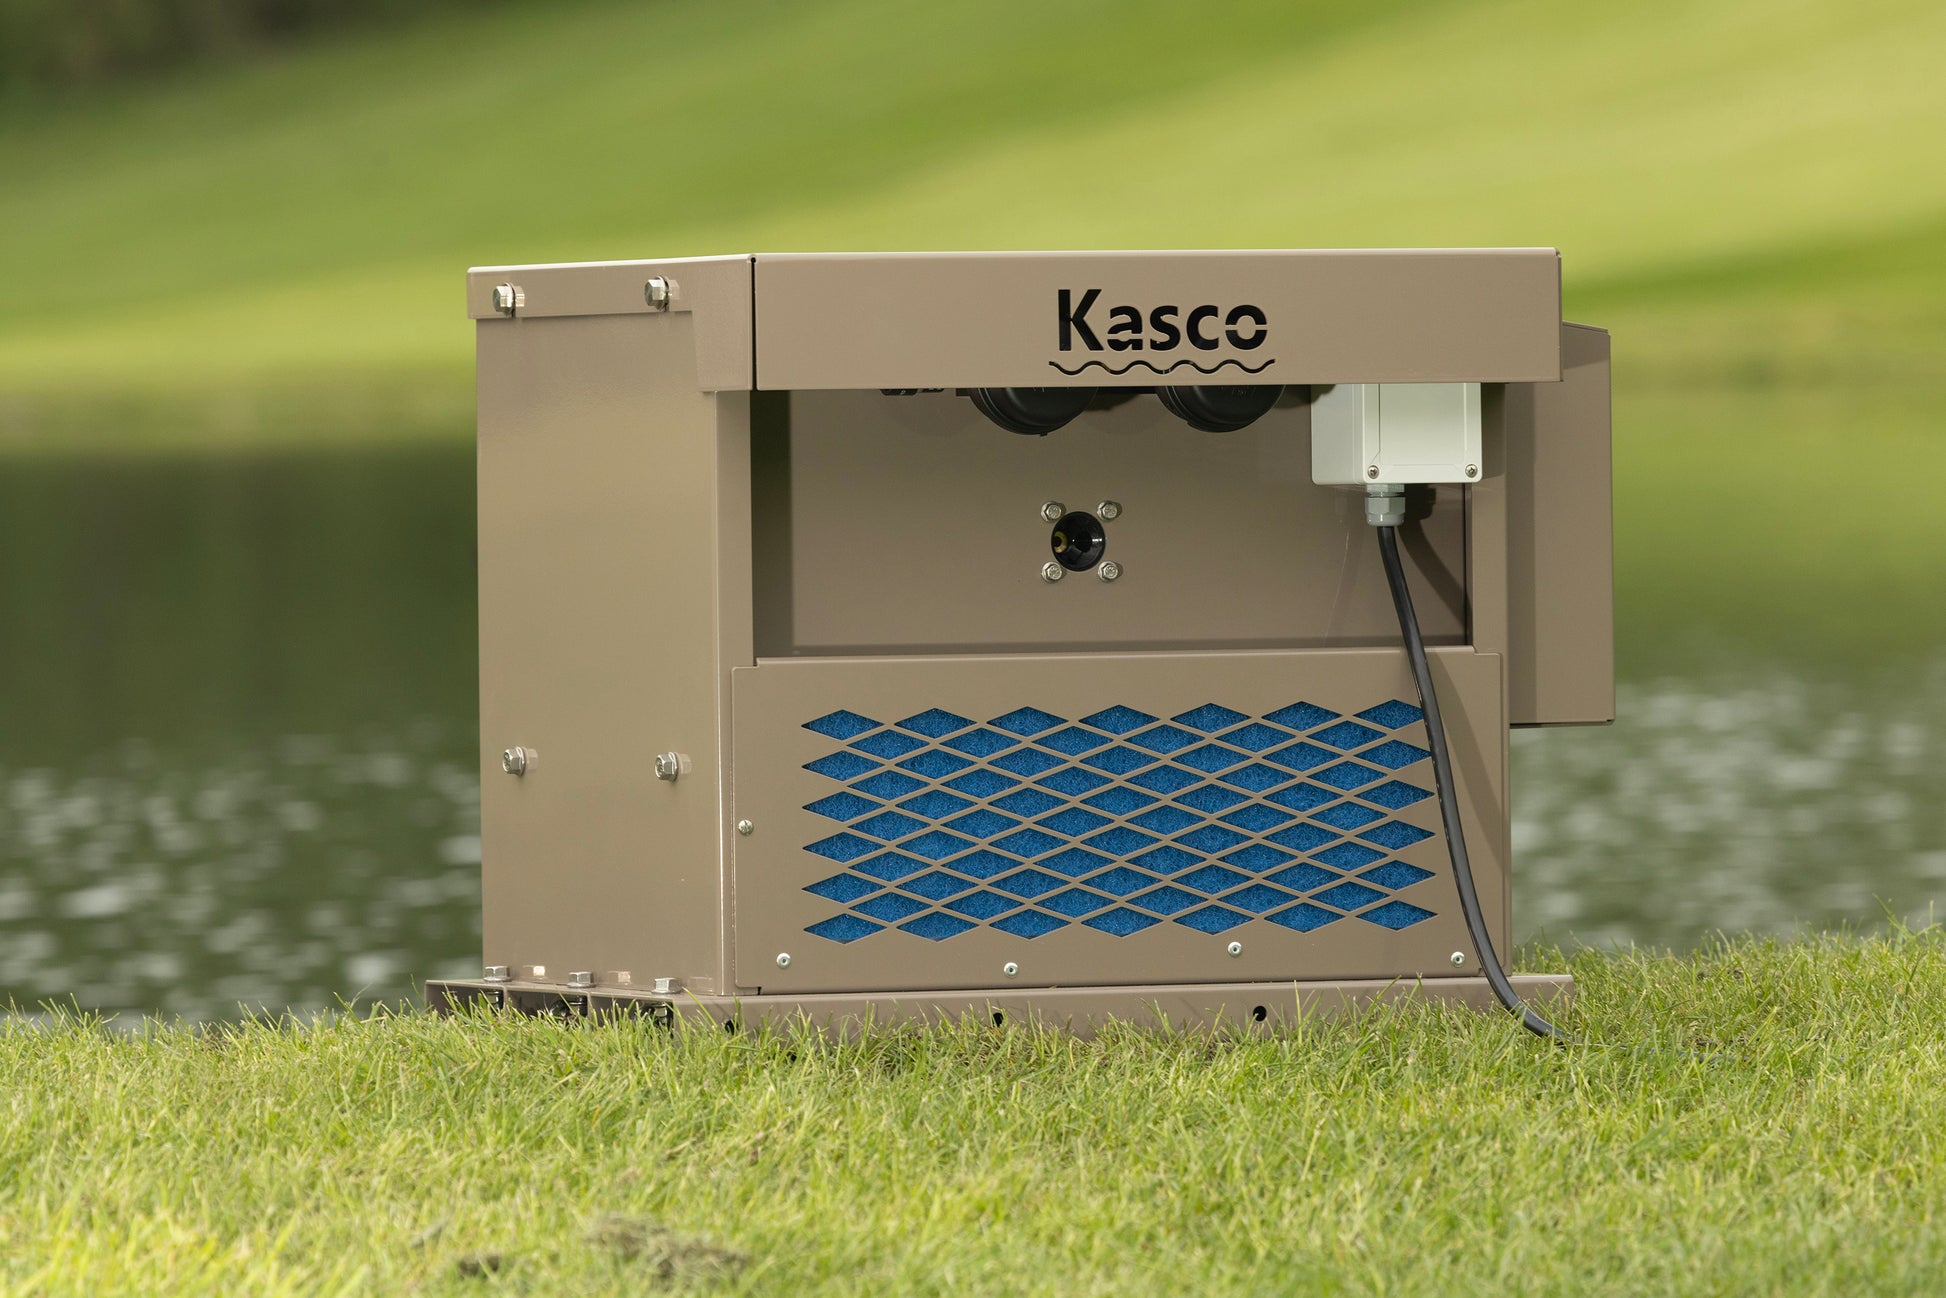 RA6 - Kasco RobustAire Pond Aeration System - Living Water Aeration